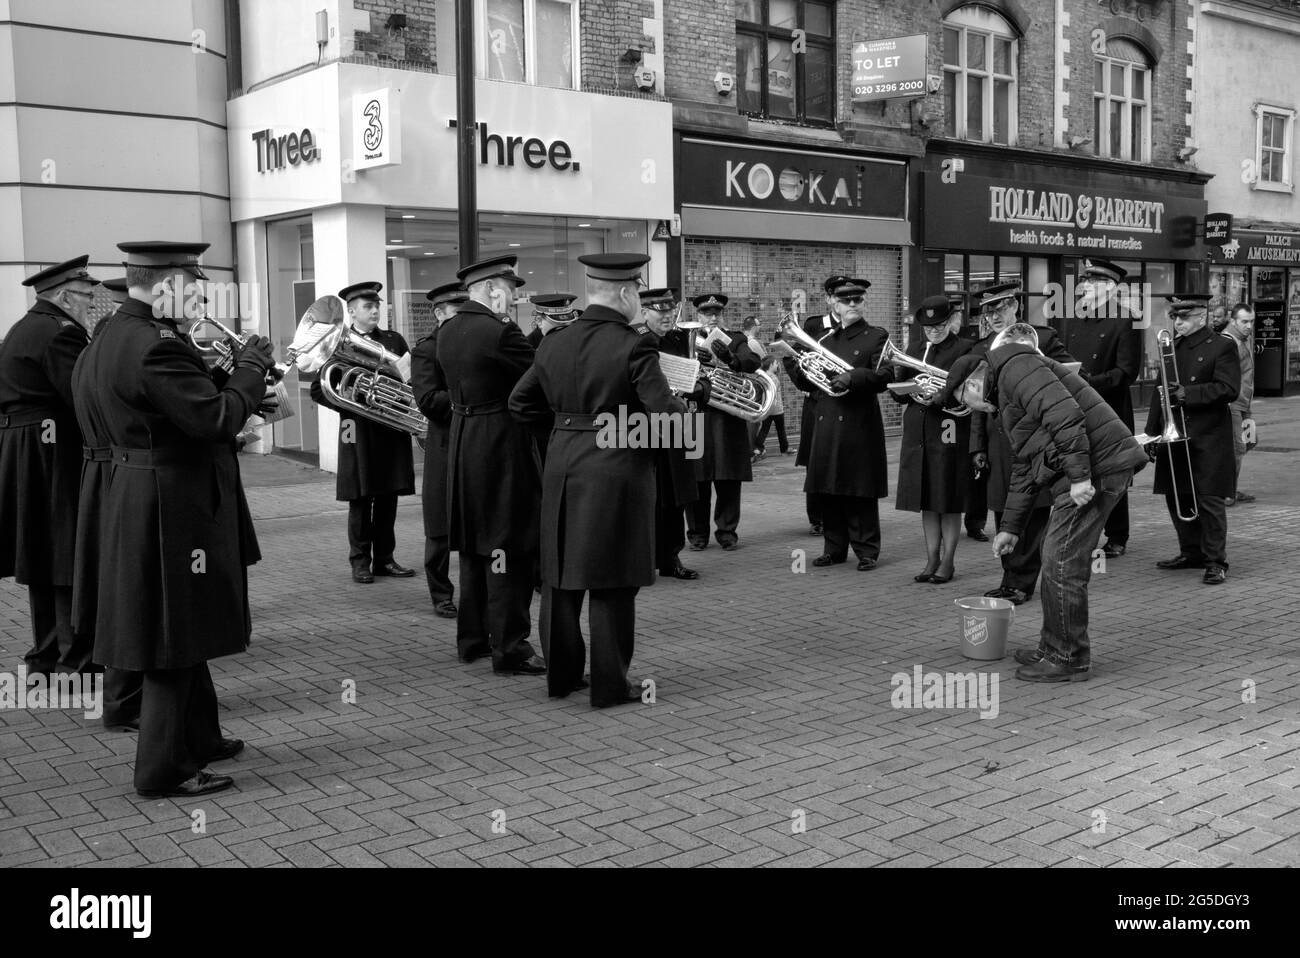 Salvation Army performing in a shopping area. Stock Photo